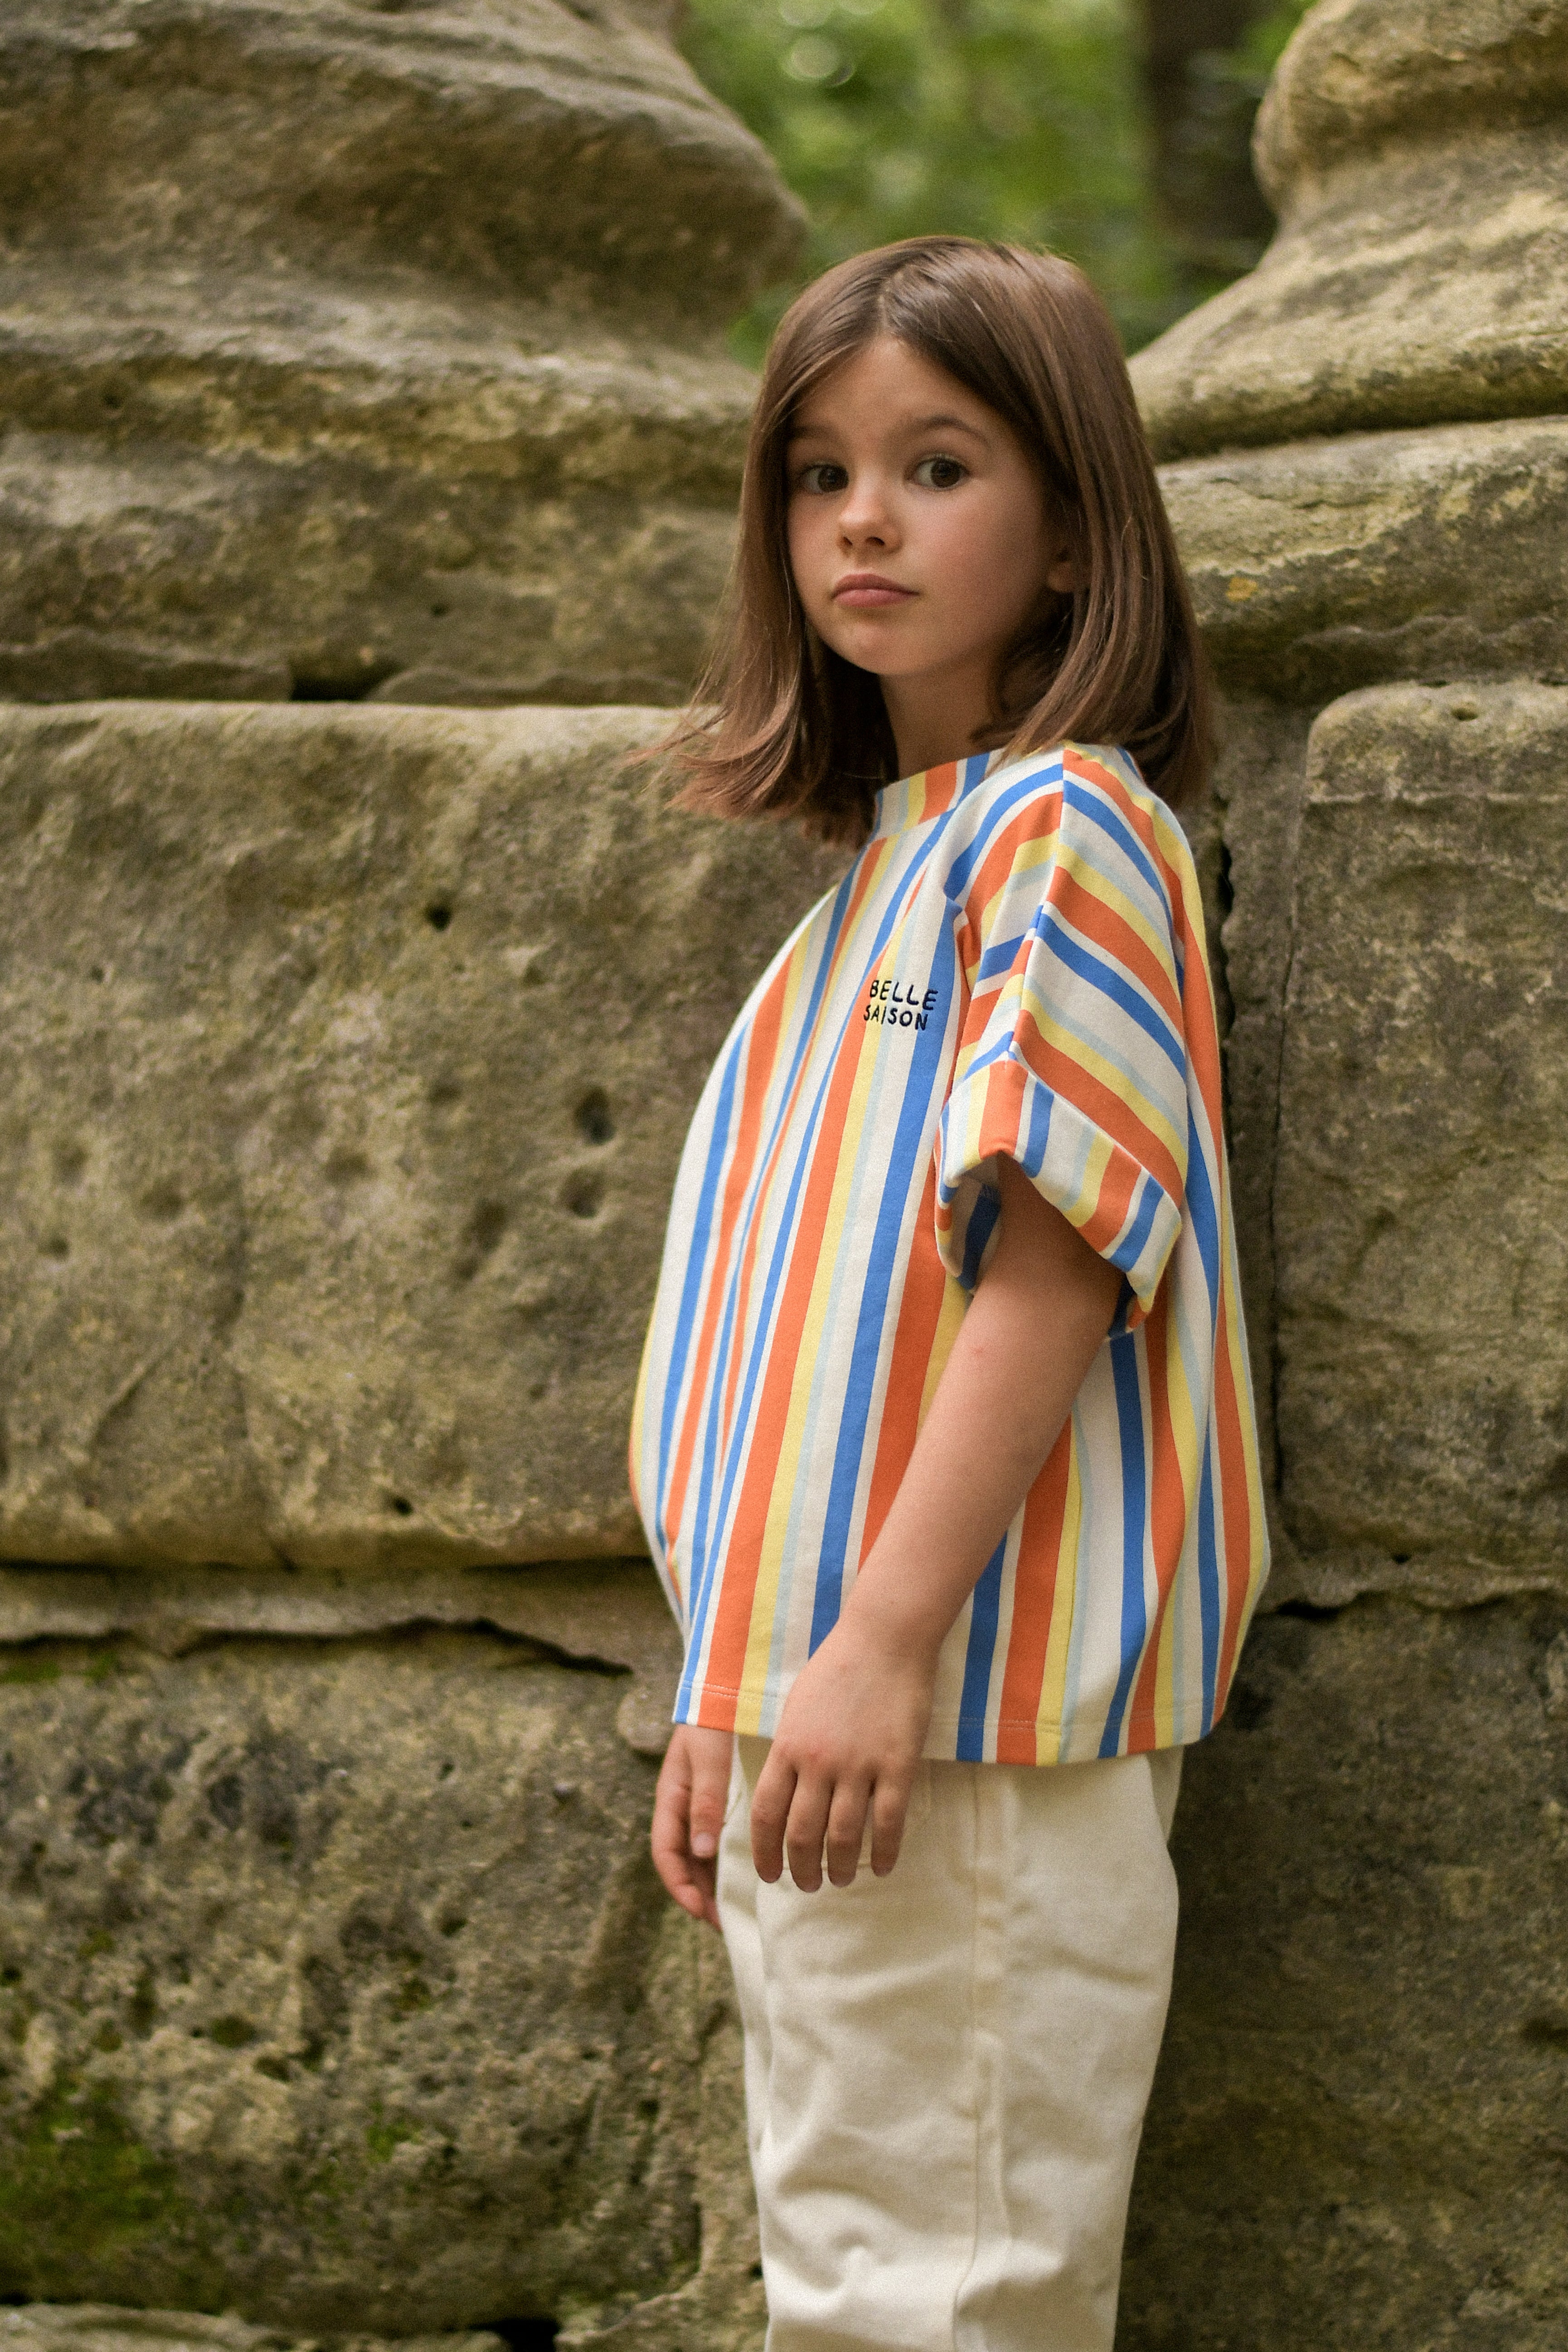 Model wearing striped boxy style t-shirt in multiple colours (red, blue, yellow, orange, and white). The t-shirt has a round neckline and the phrase "Belle Saison" on the left side. Made by Maison Tadaboum